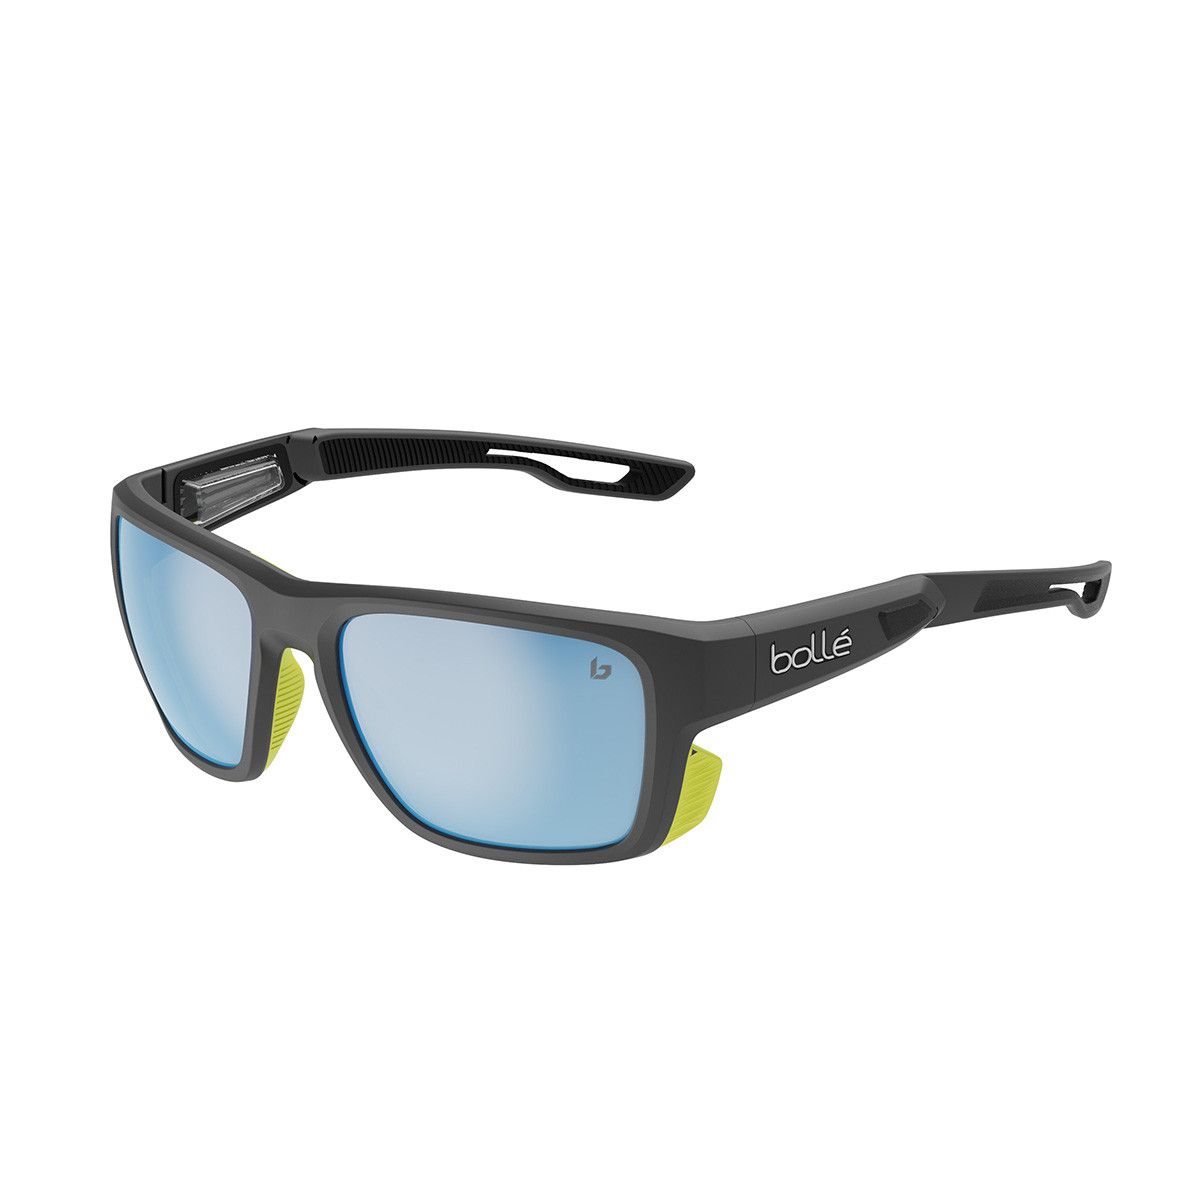 Bolle King inland gold polarized lenses. Best mens fishing